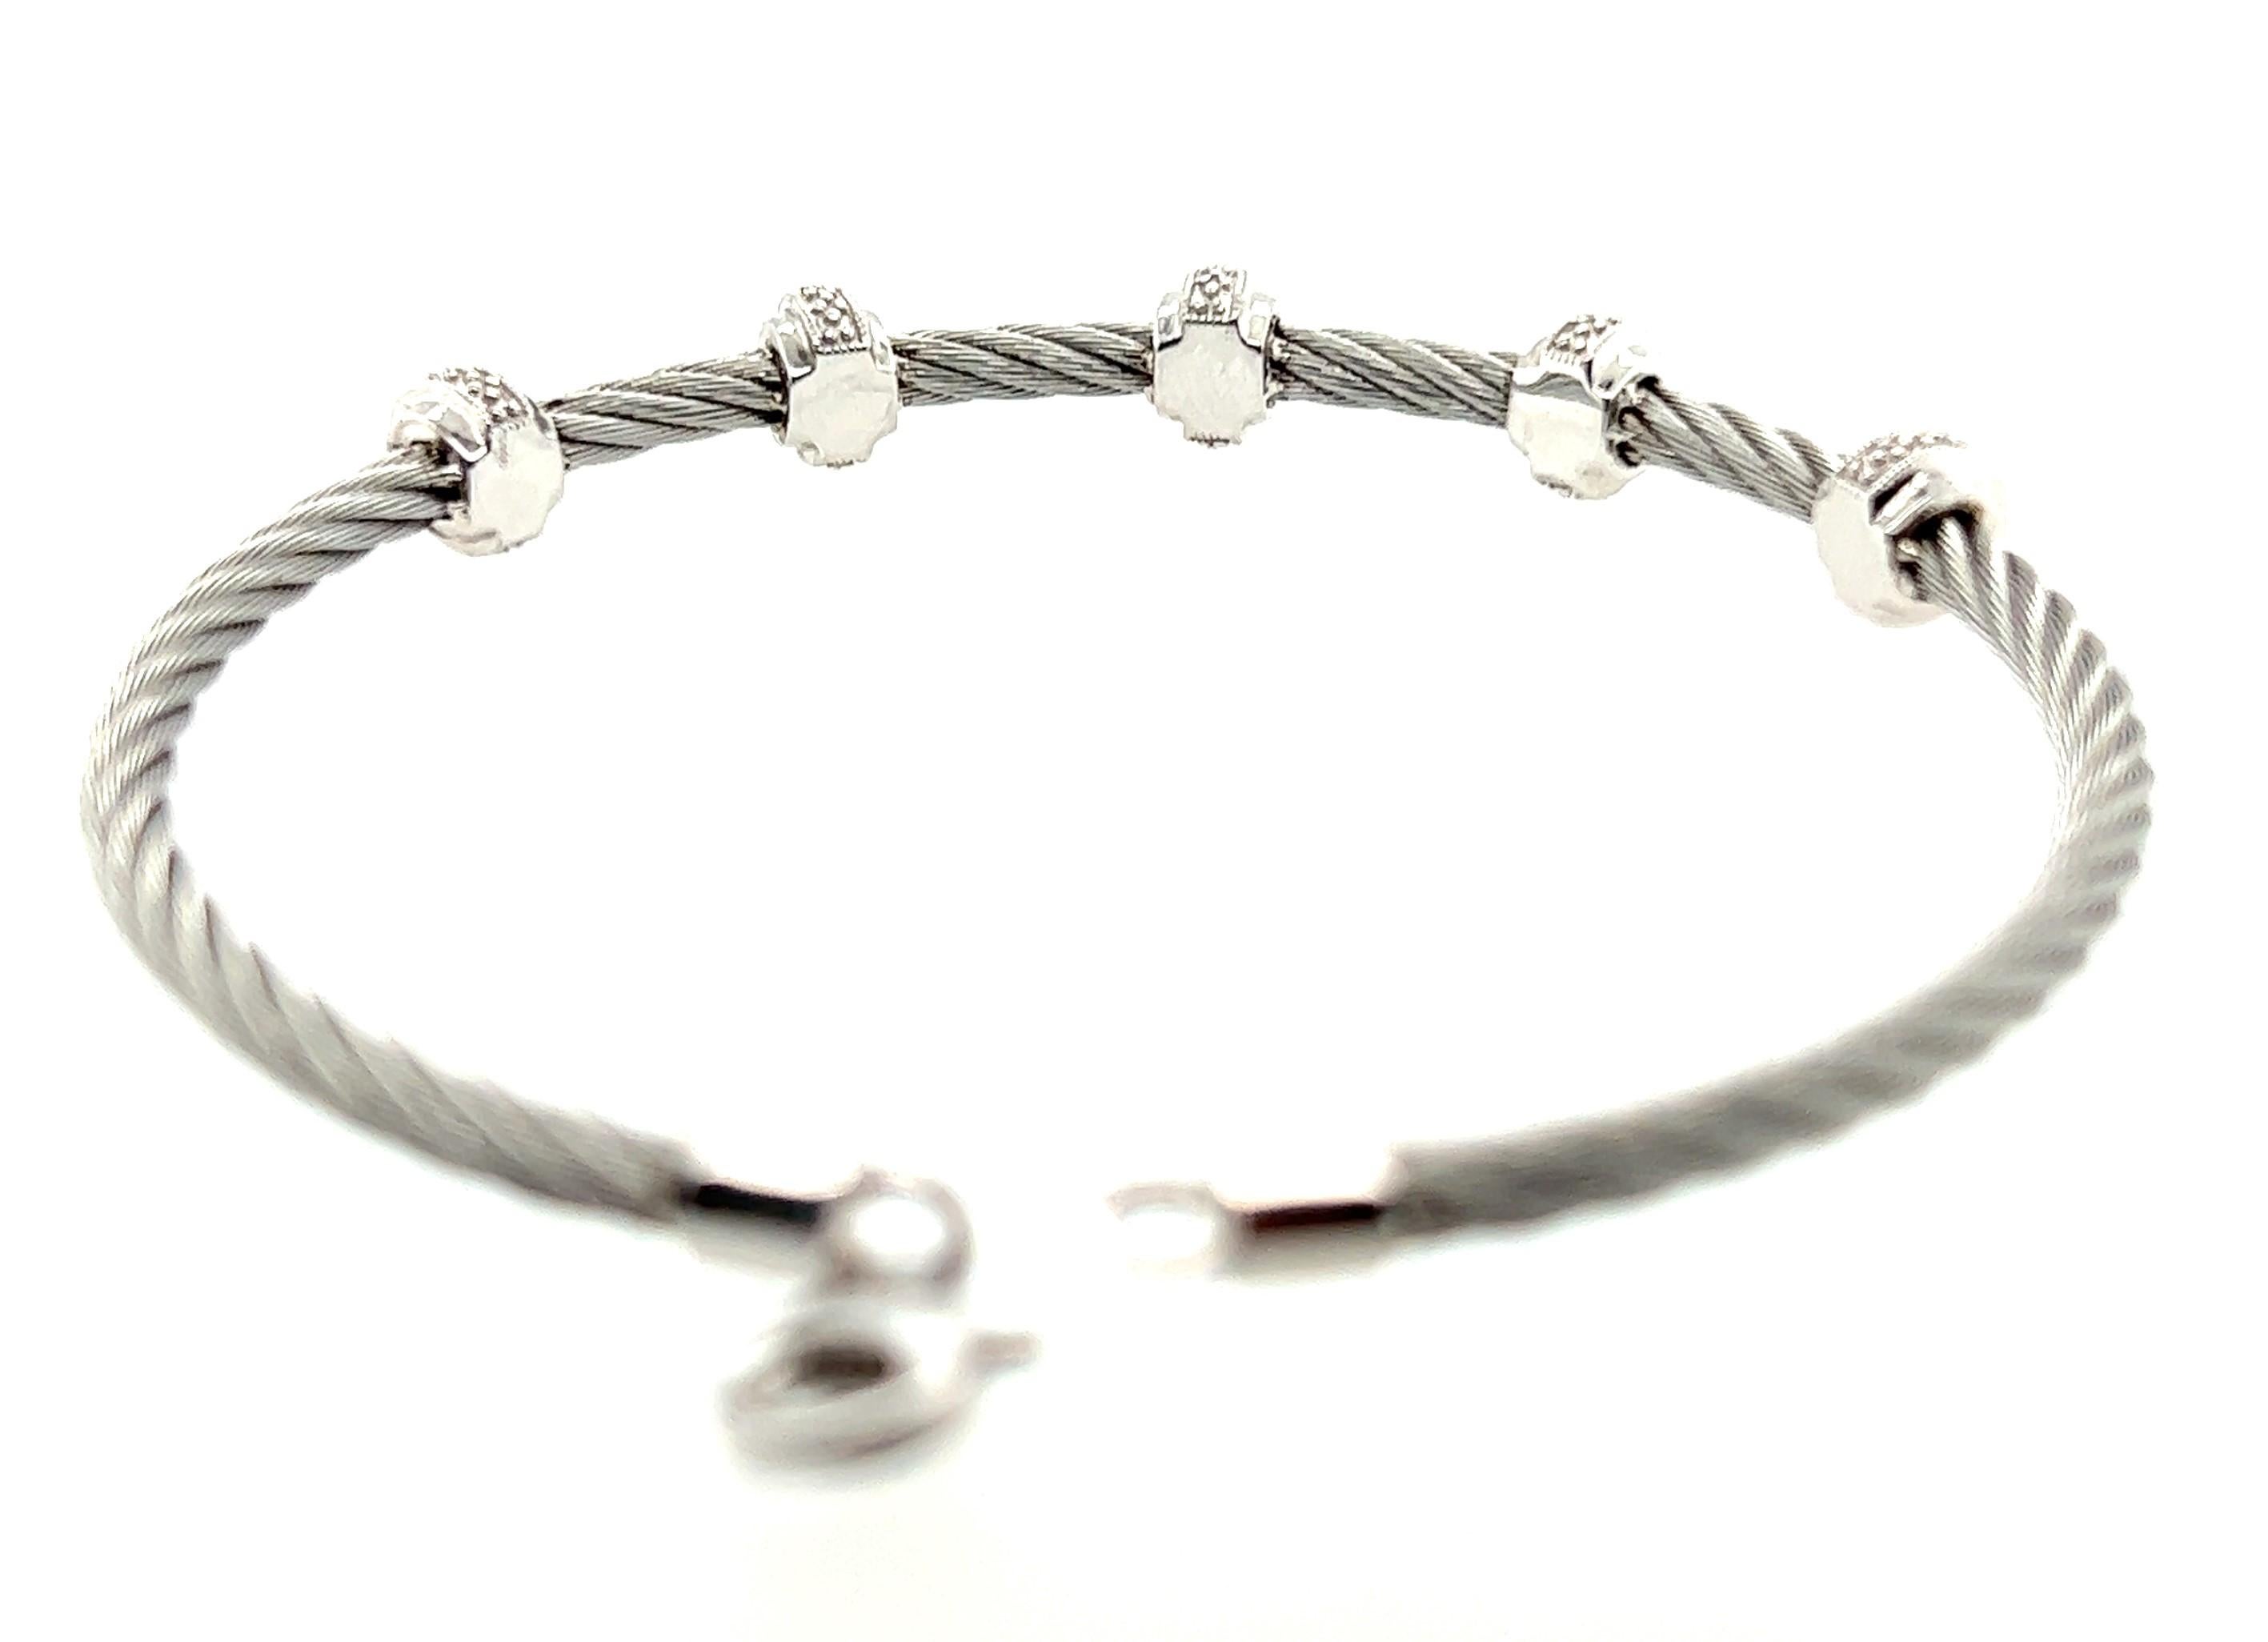 Sterling silver and stainless steel bracelet with lobster claw closure.

5 Sterling Silver Rondelles measure 3/16 inch each.
5 Rondelles measure approx. 2 inches across wrist.
Rondelles sit equadistant on a steel cable.
Diamonds are .10 total carat